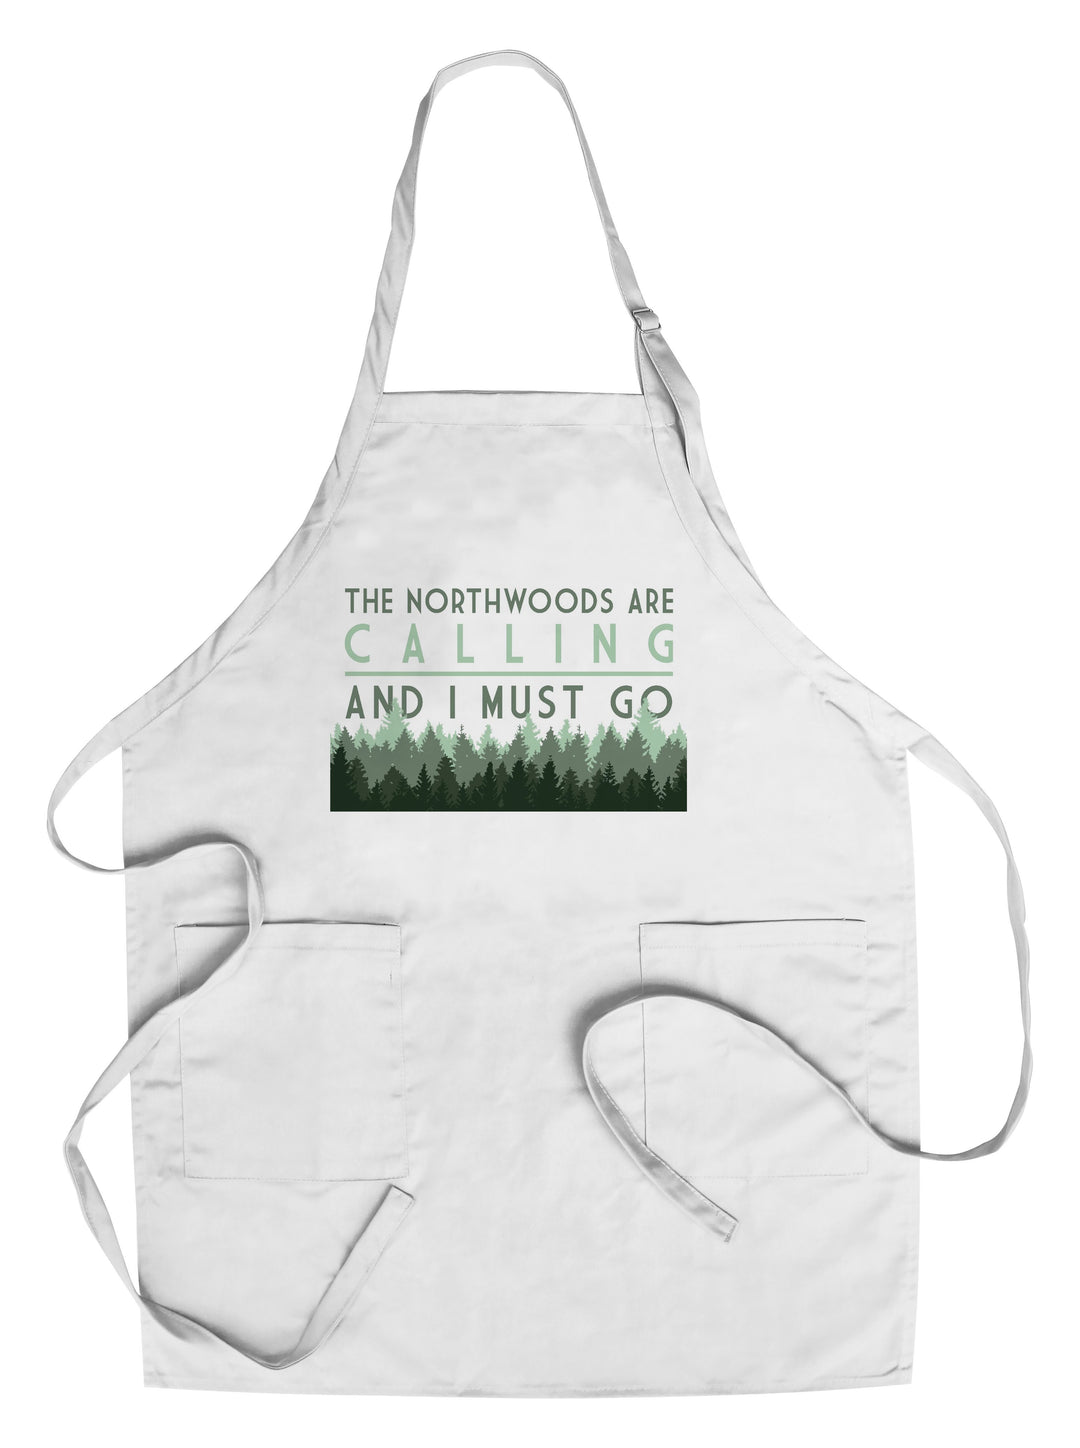 Northwoods, Wisconsin, Northwoods Calling & I Must Go, Pine Trees, Lantern Press Artwork, Towels and Aprons Kitchen Lantern Press Chef's Apron 